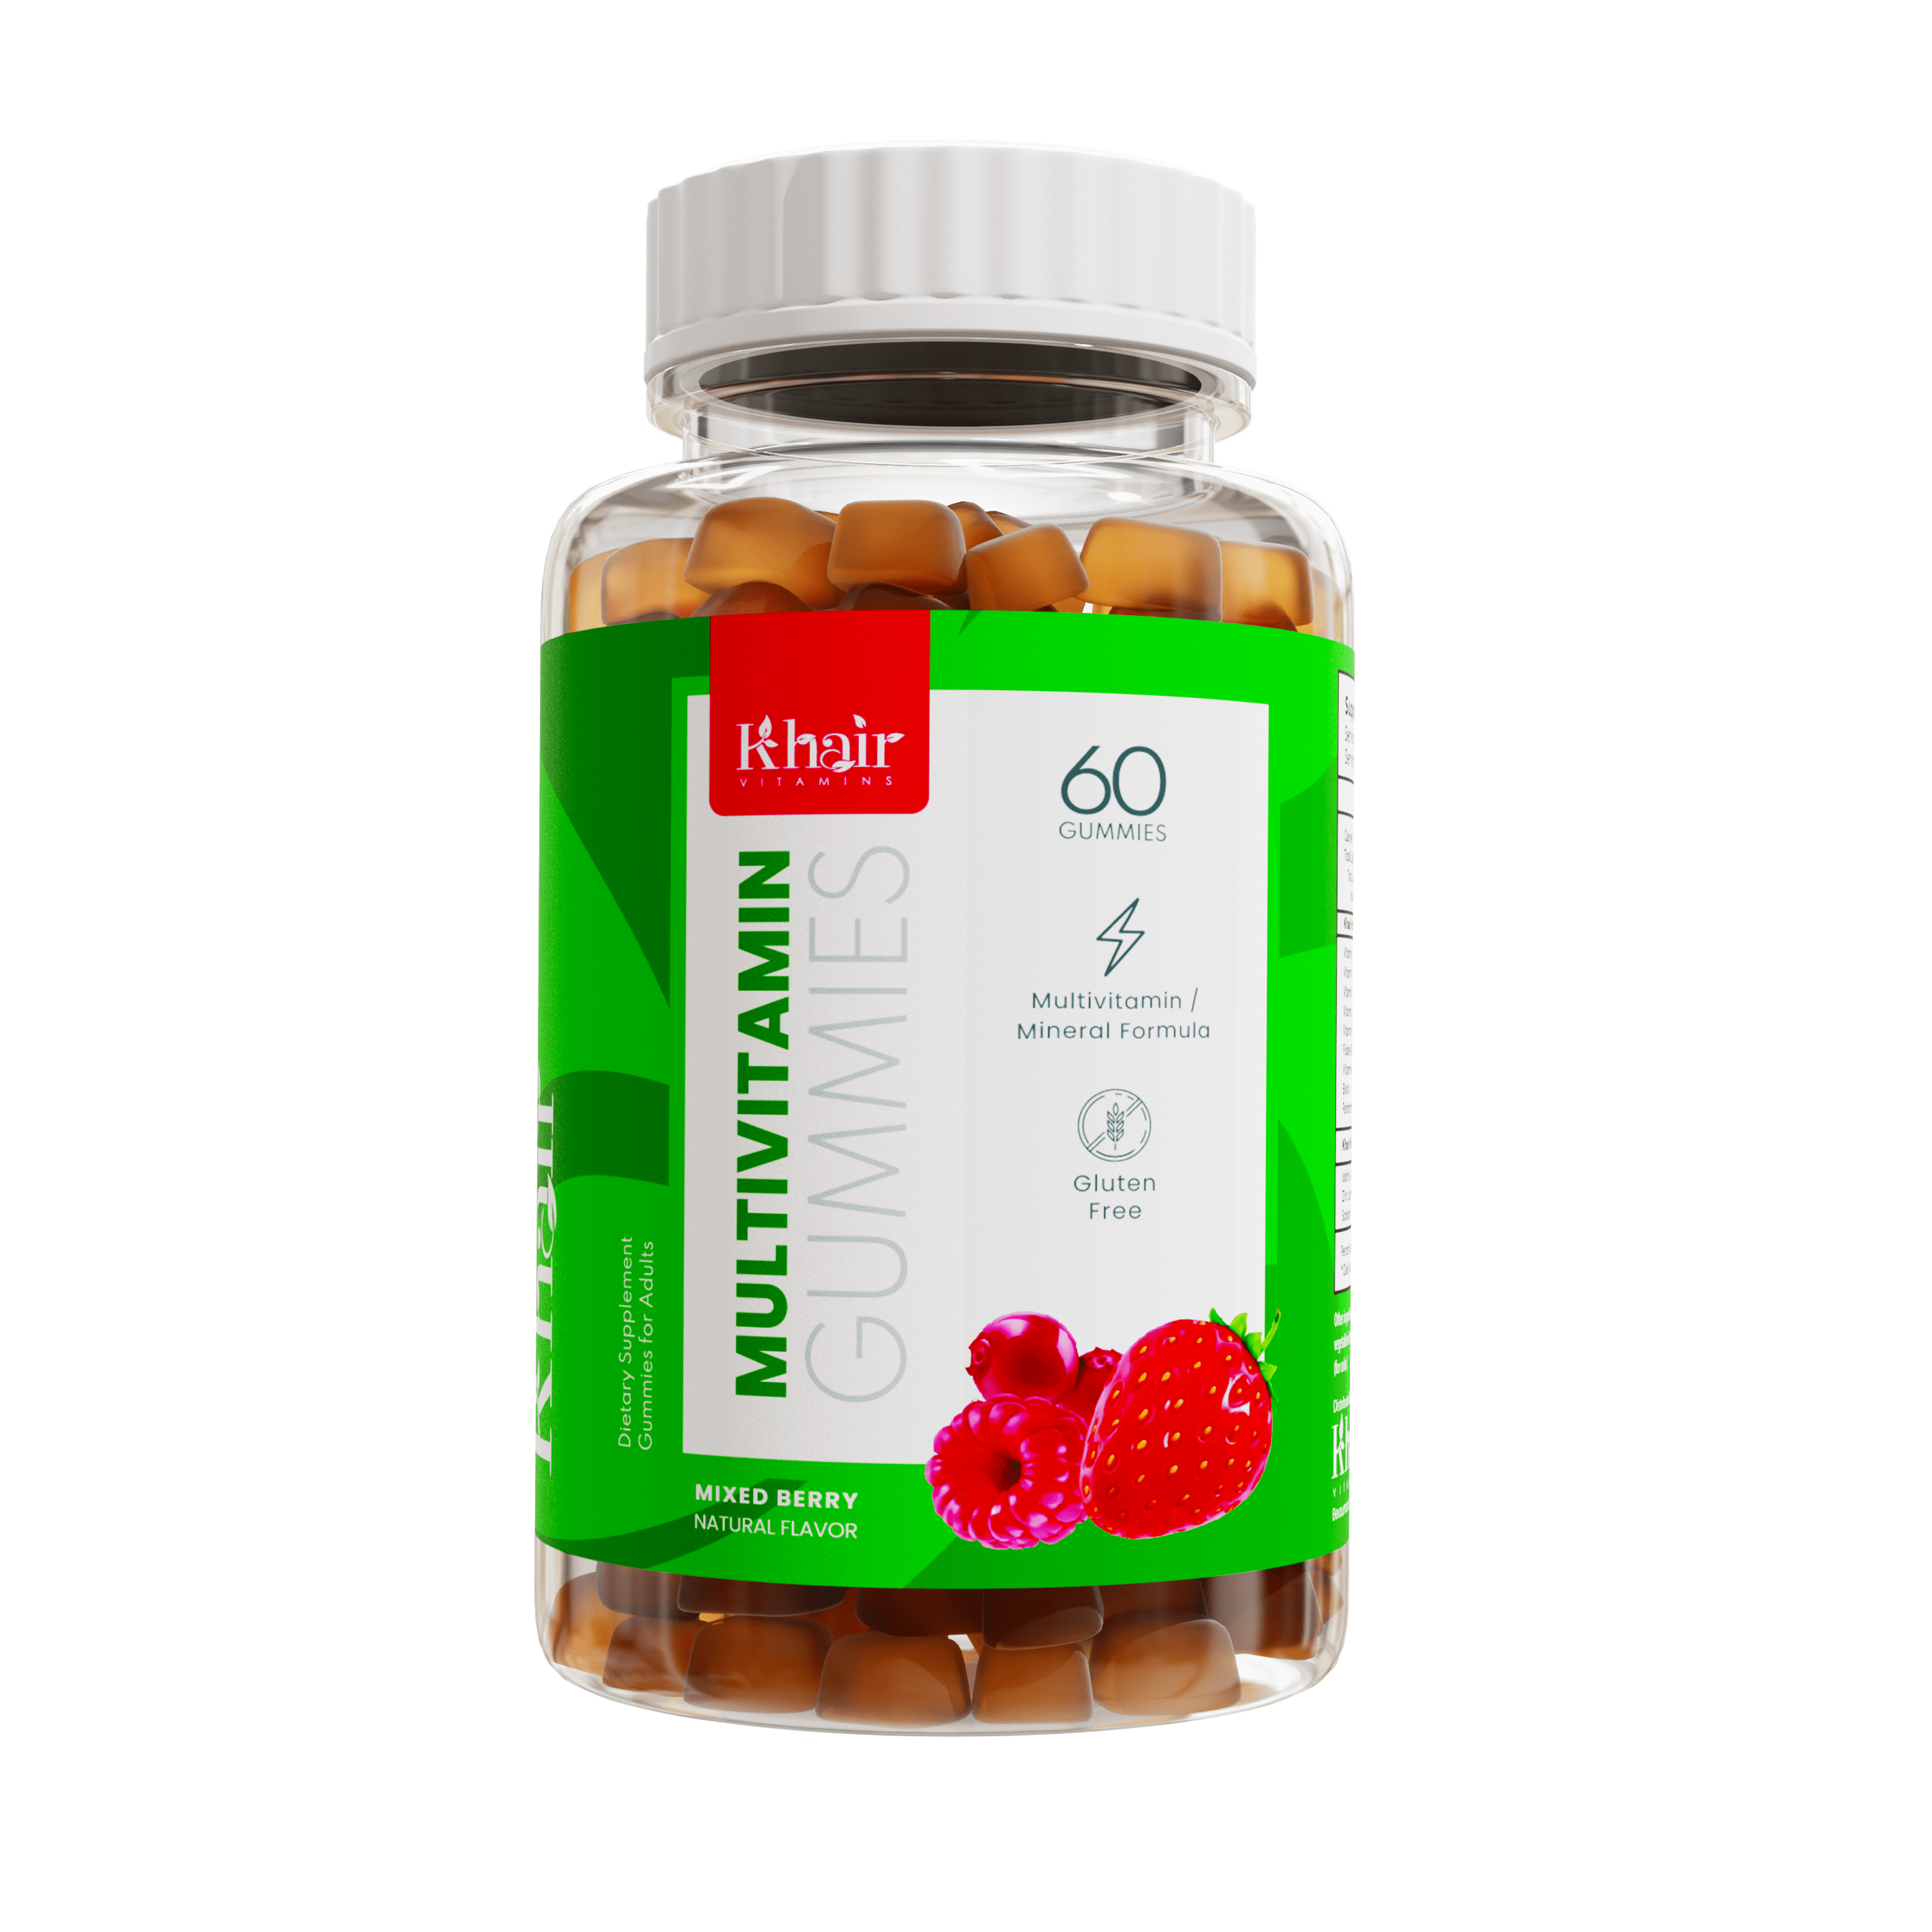  A bottle of multivitamin gummies. Get your daily dose of health and savings in one delicious package.